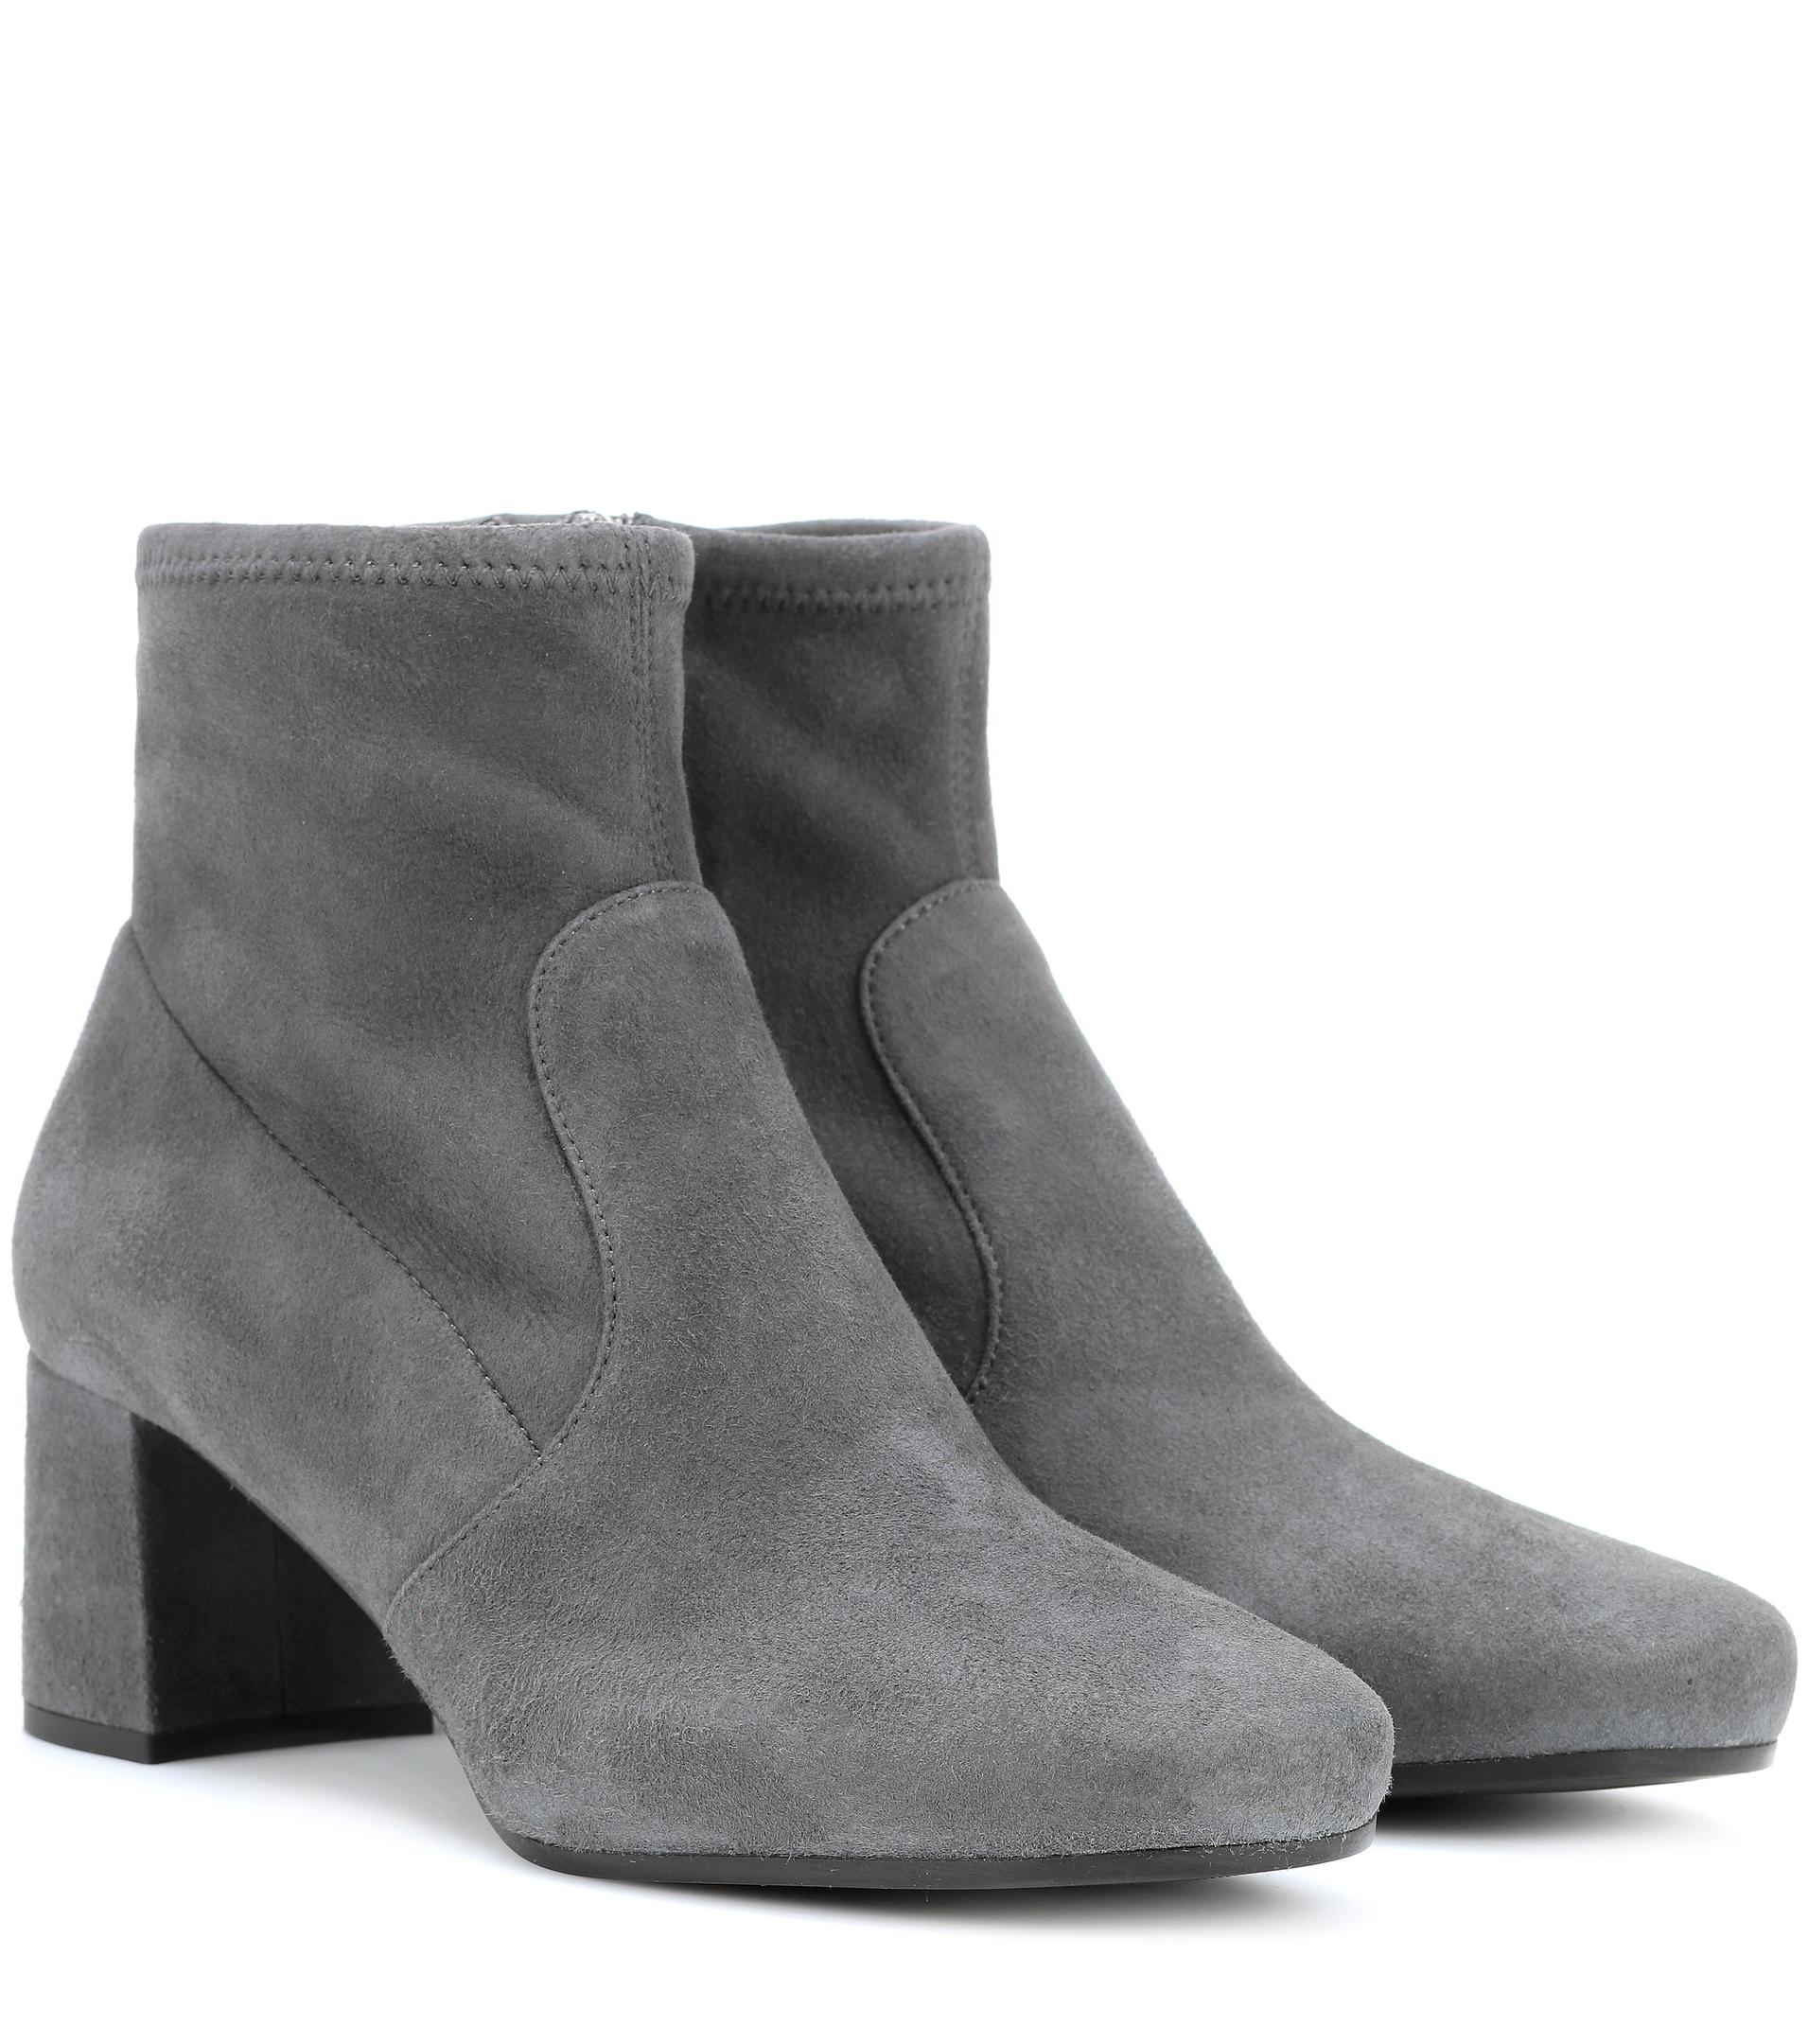 Prada Suede Ankle Boots in Grey (Gray) - Lyst